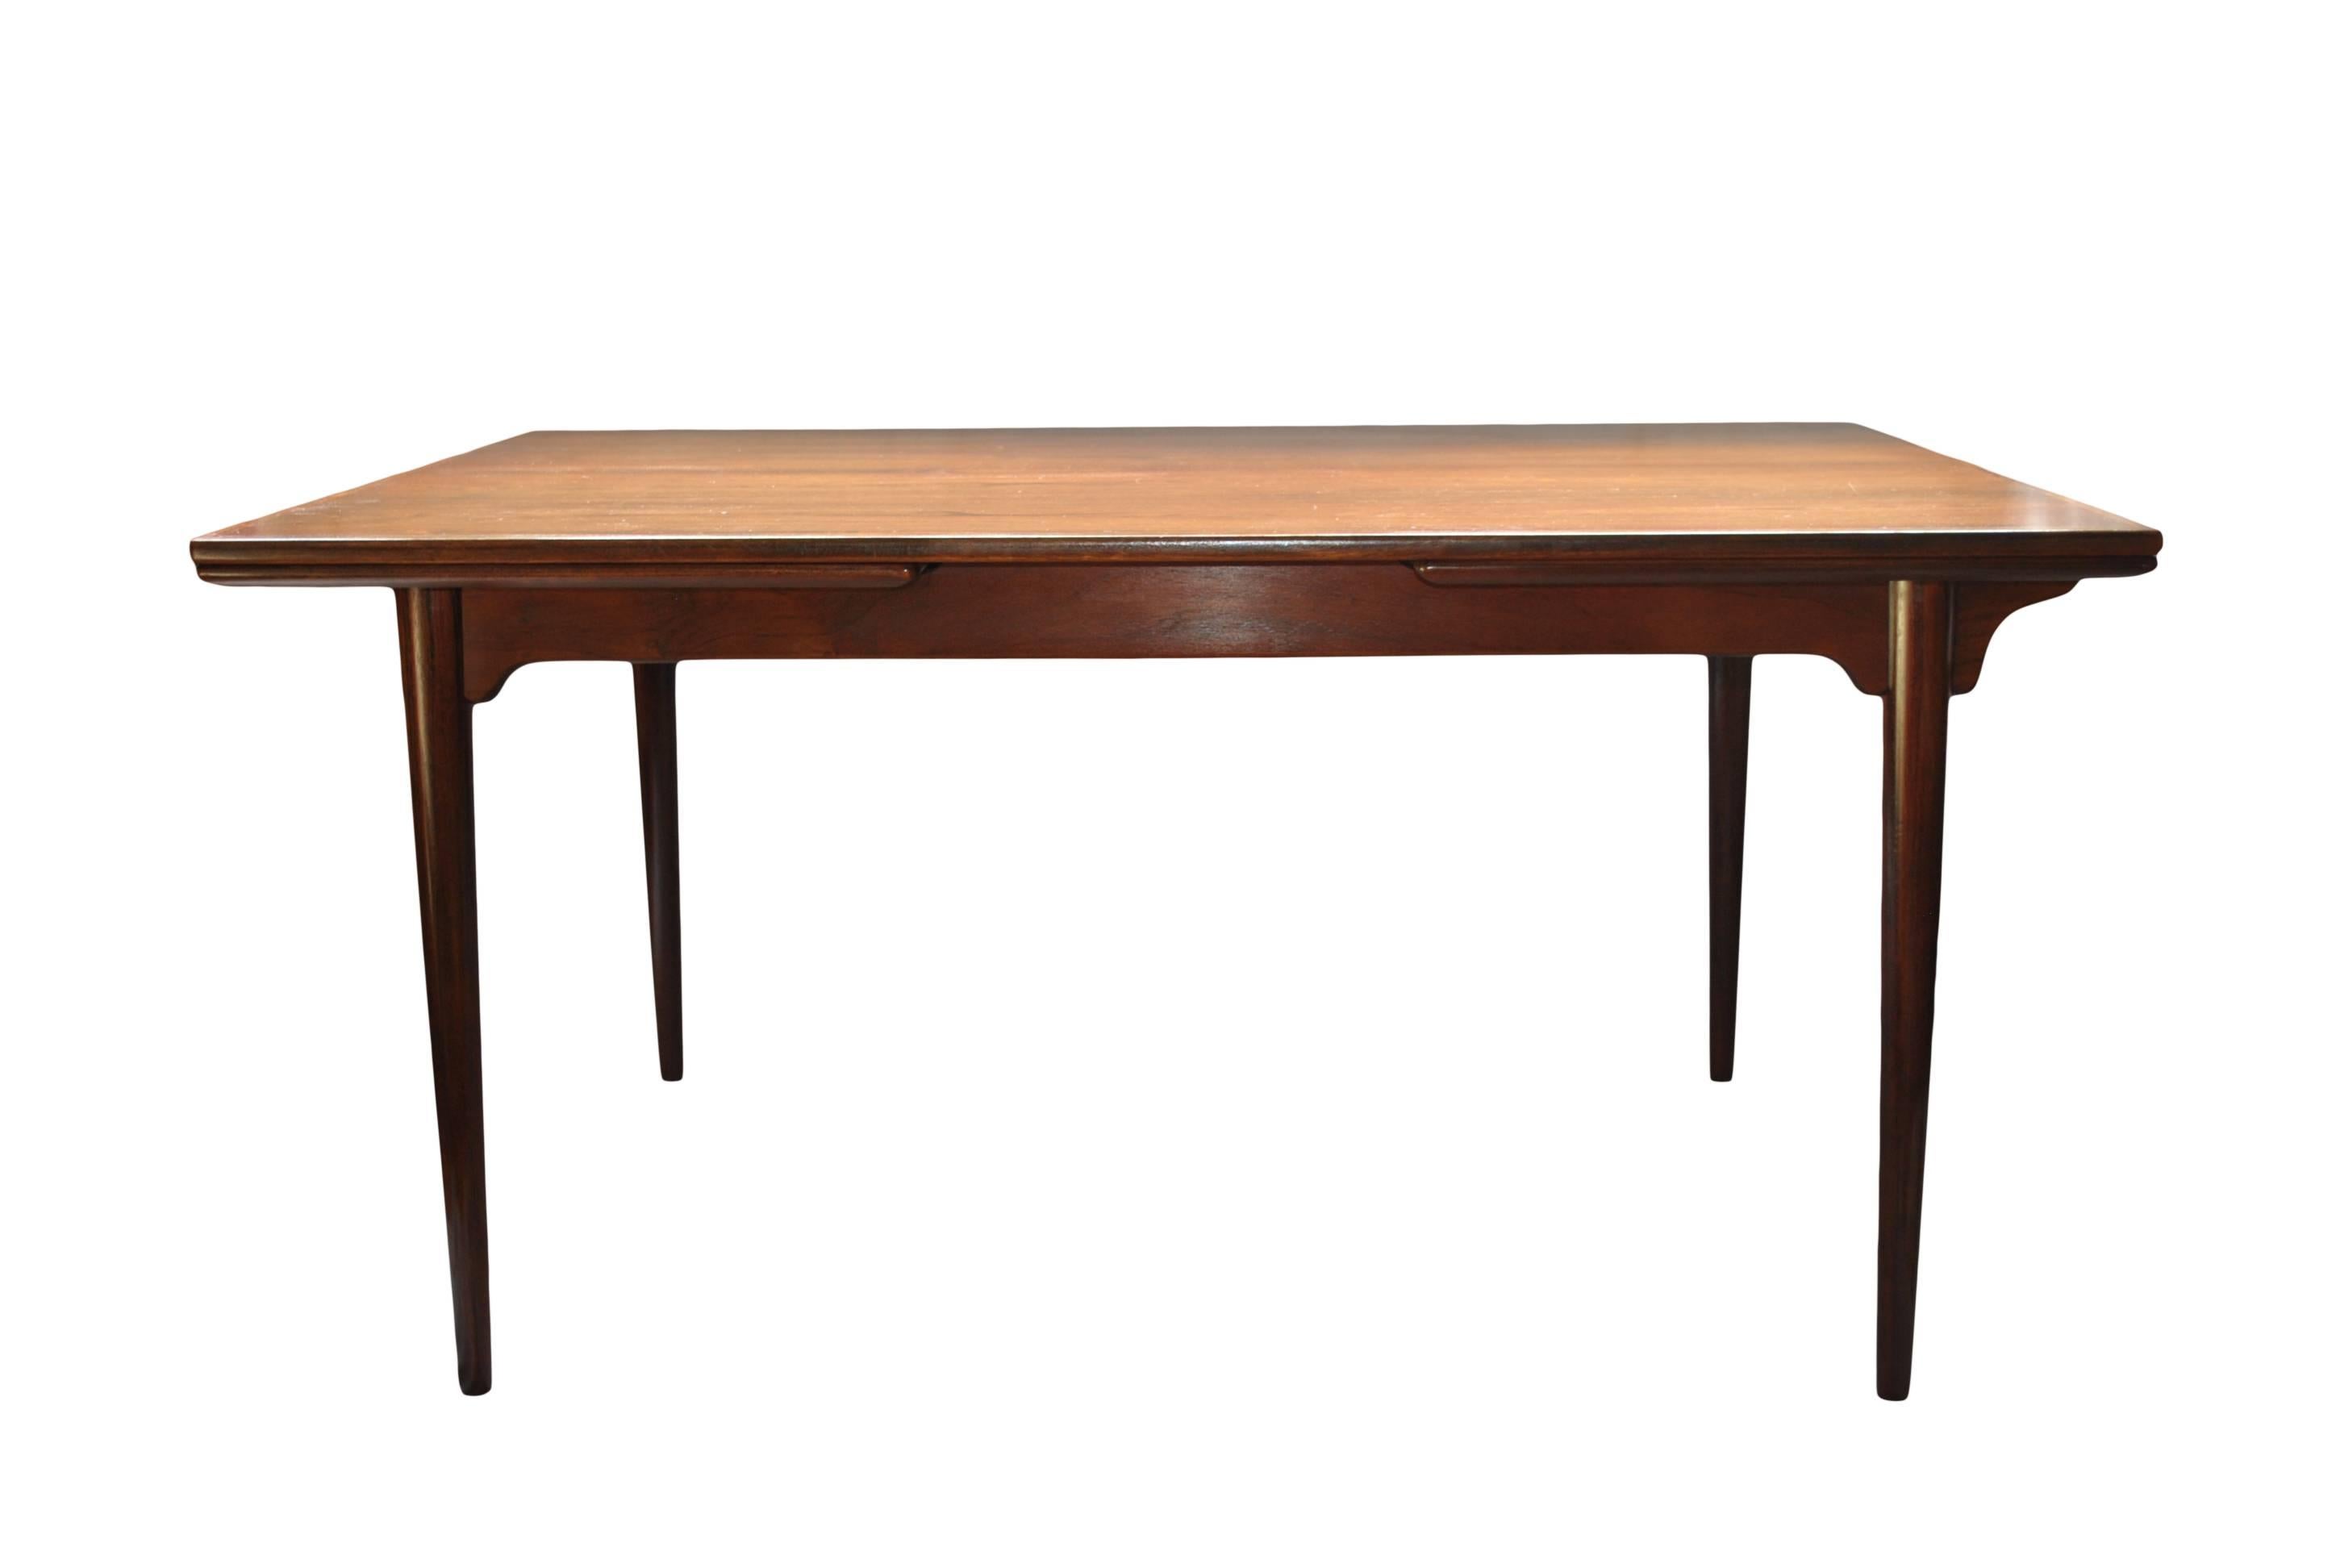 Danish Midcentury dining table designed by Gunni Omann for Omann Jun. Produced in Denmark, circa 1960. Refinished surface. Superb condition. Double pull extending leaves to a max of 240cm.
Easily dismantled and reassembled for safe transportation.
